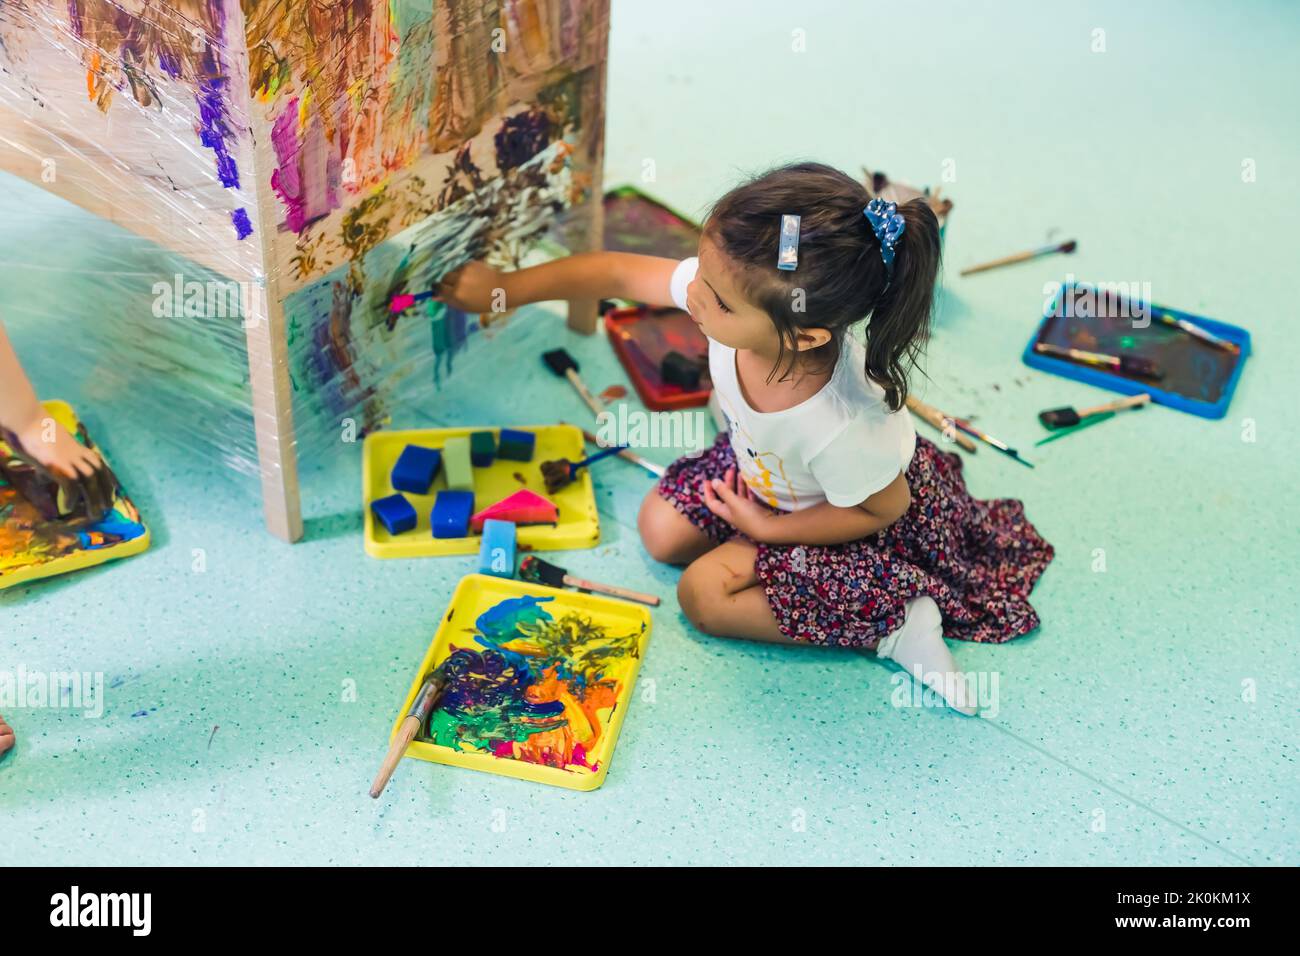 Cling film painting. Little girl toddler painting with a sponge and paints on a cling film wrapped all the way round the wooden shelf unit. Creative activity for kids development at the nursery school. High quality photo Stock Photo